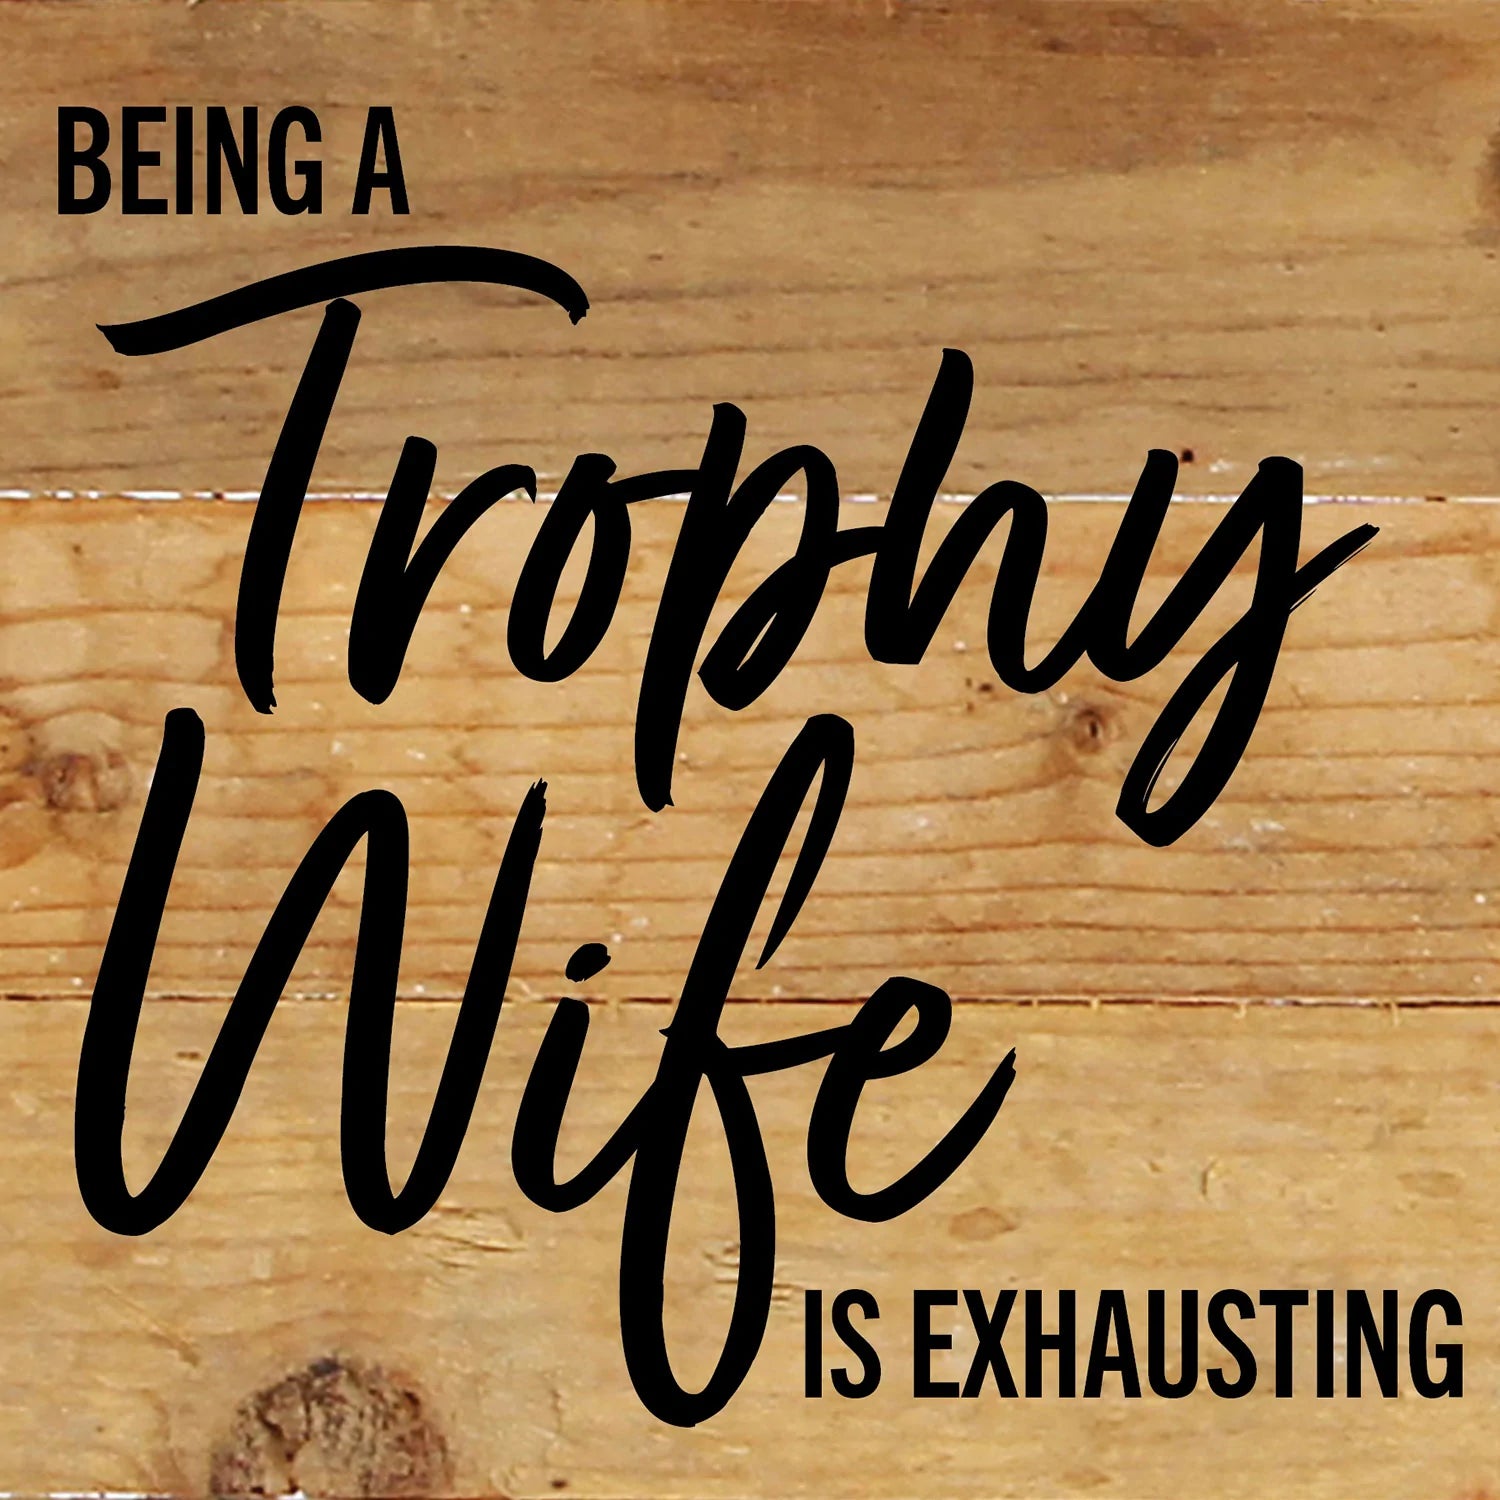 Being a Trophy Wife is Exhausting / 6x6 Reclaimed Wood Wall Decor Sign